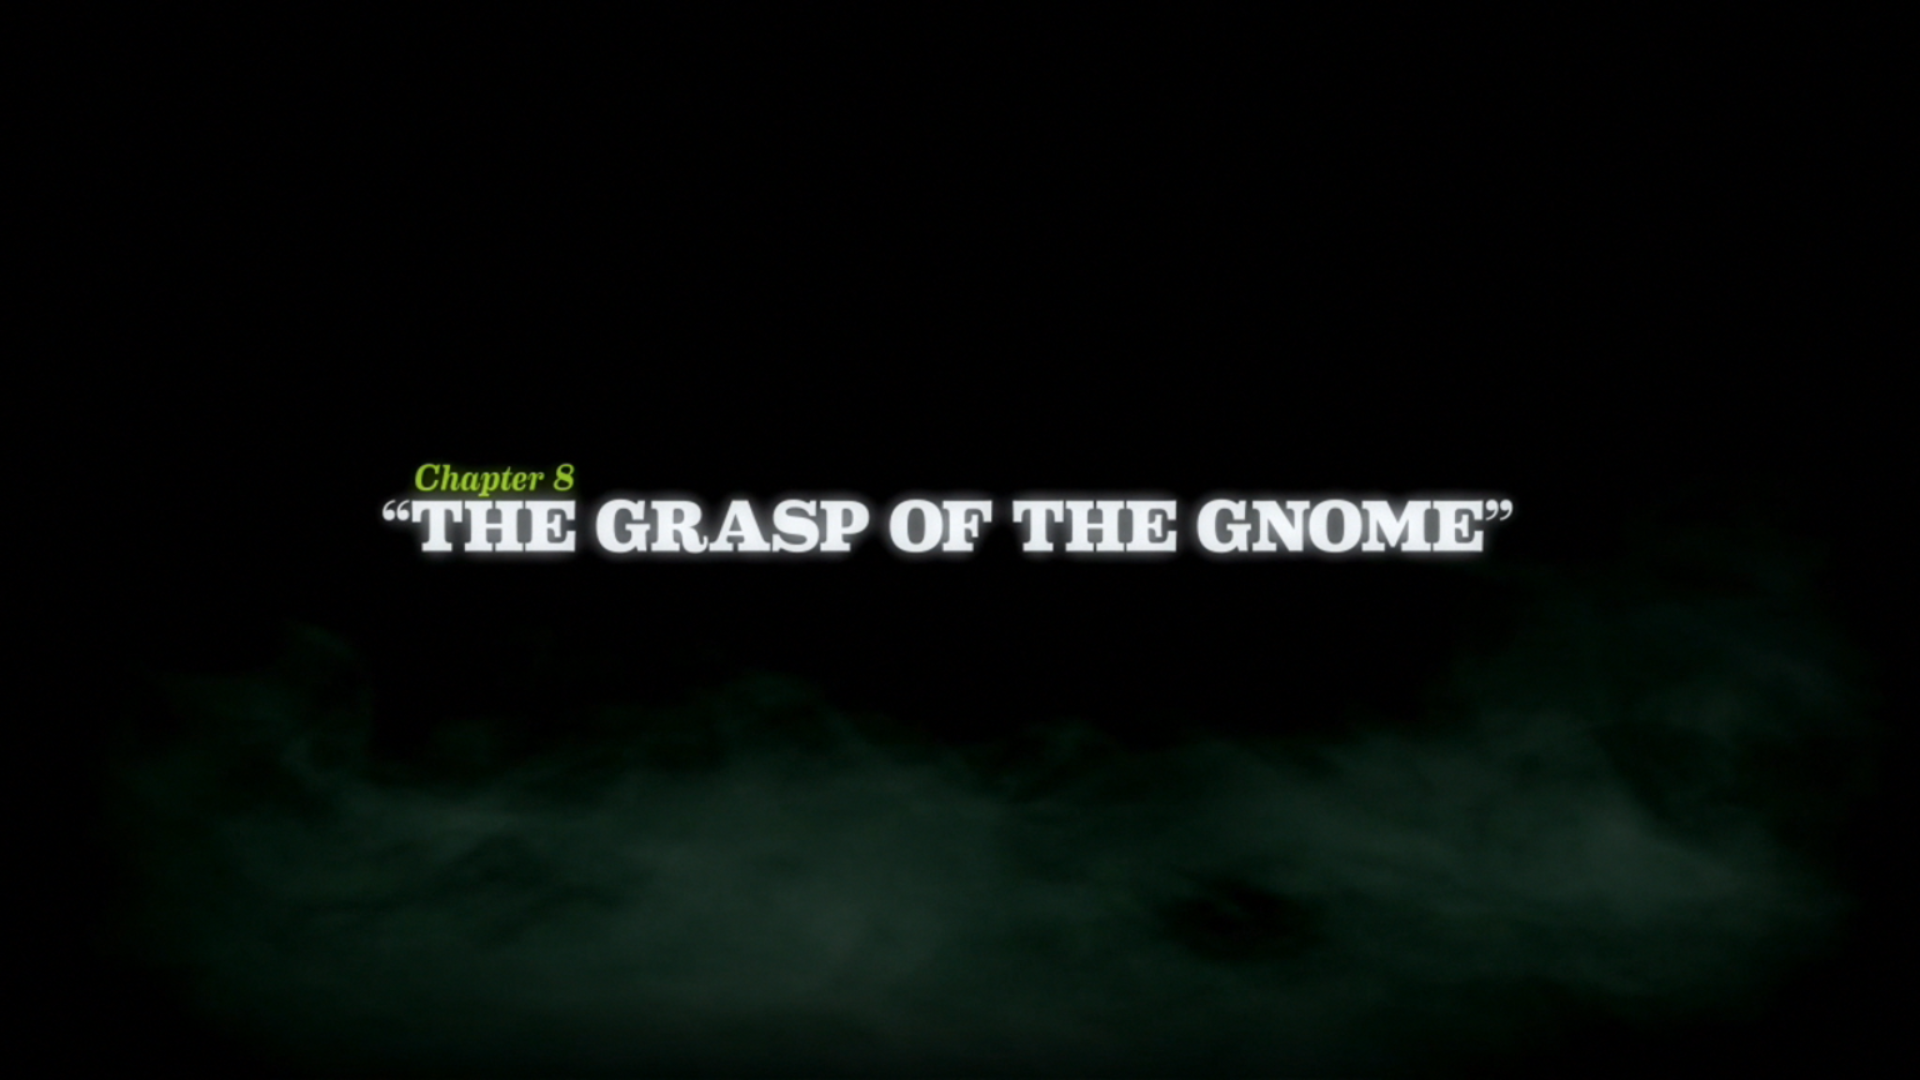 The_Grasp_of_the_Gnome_title_card